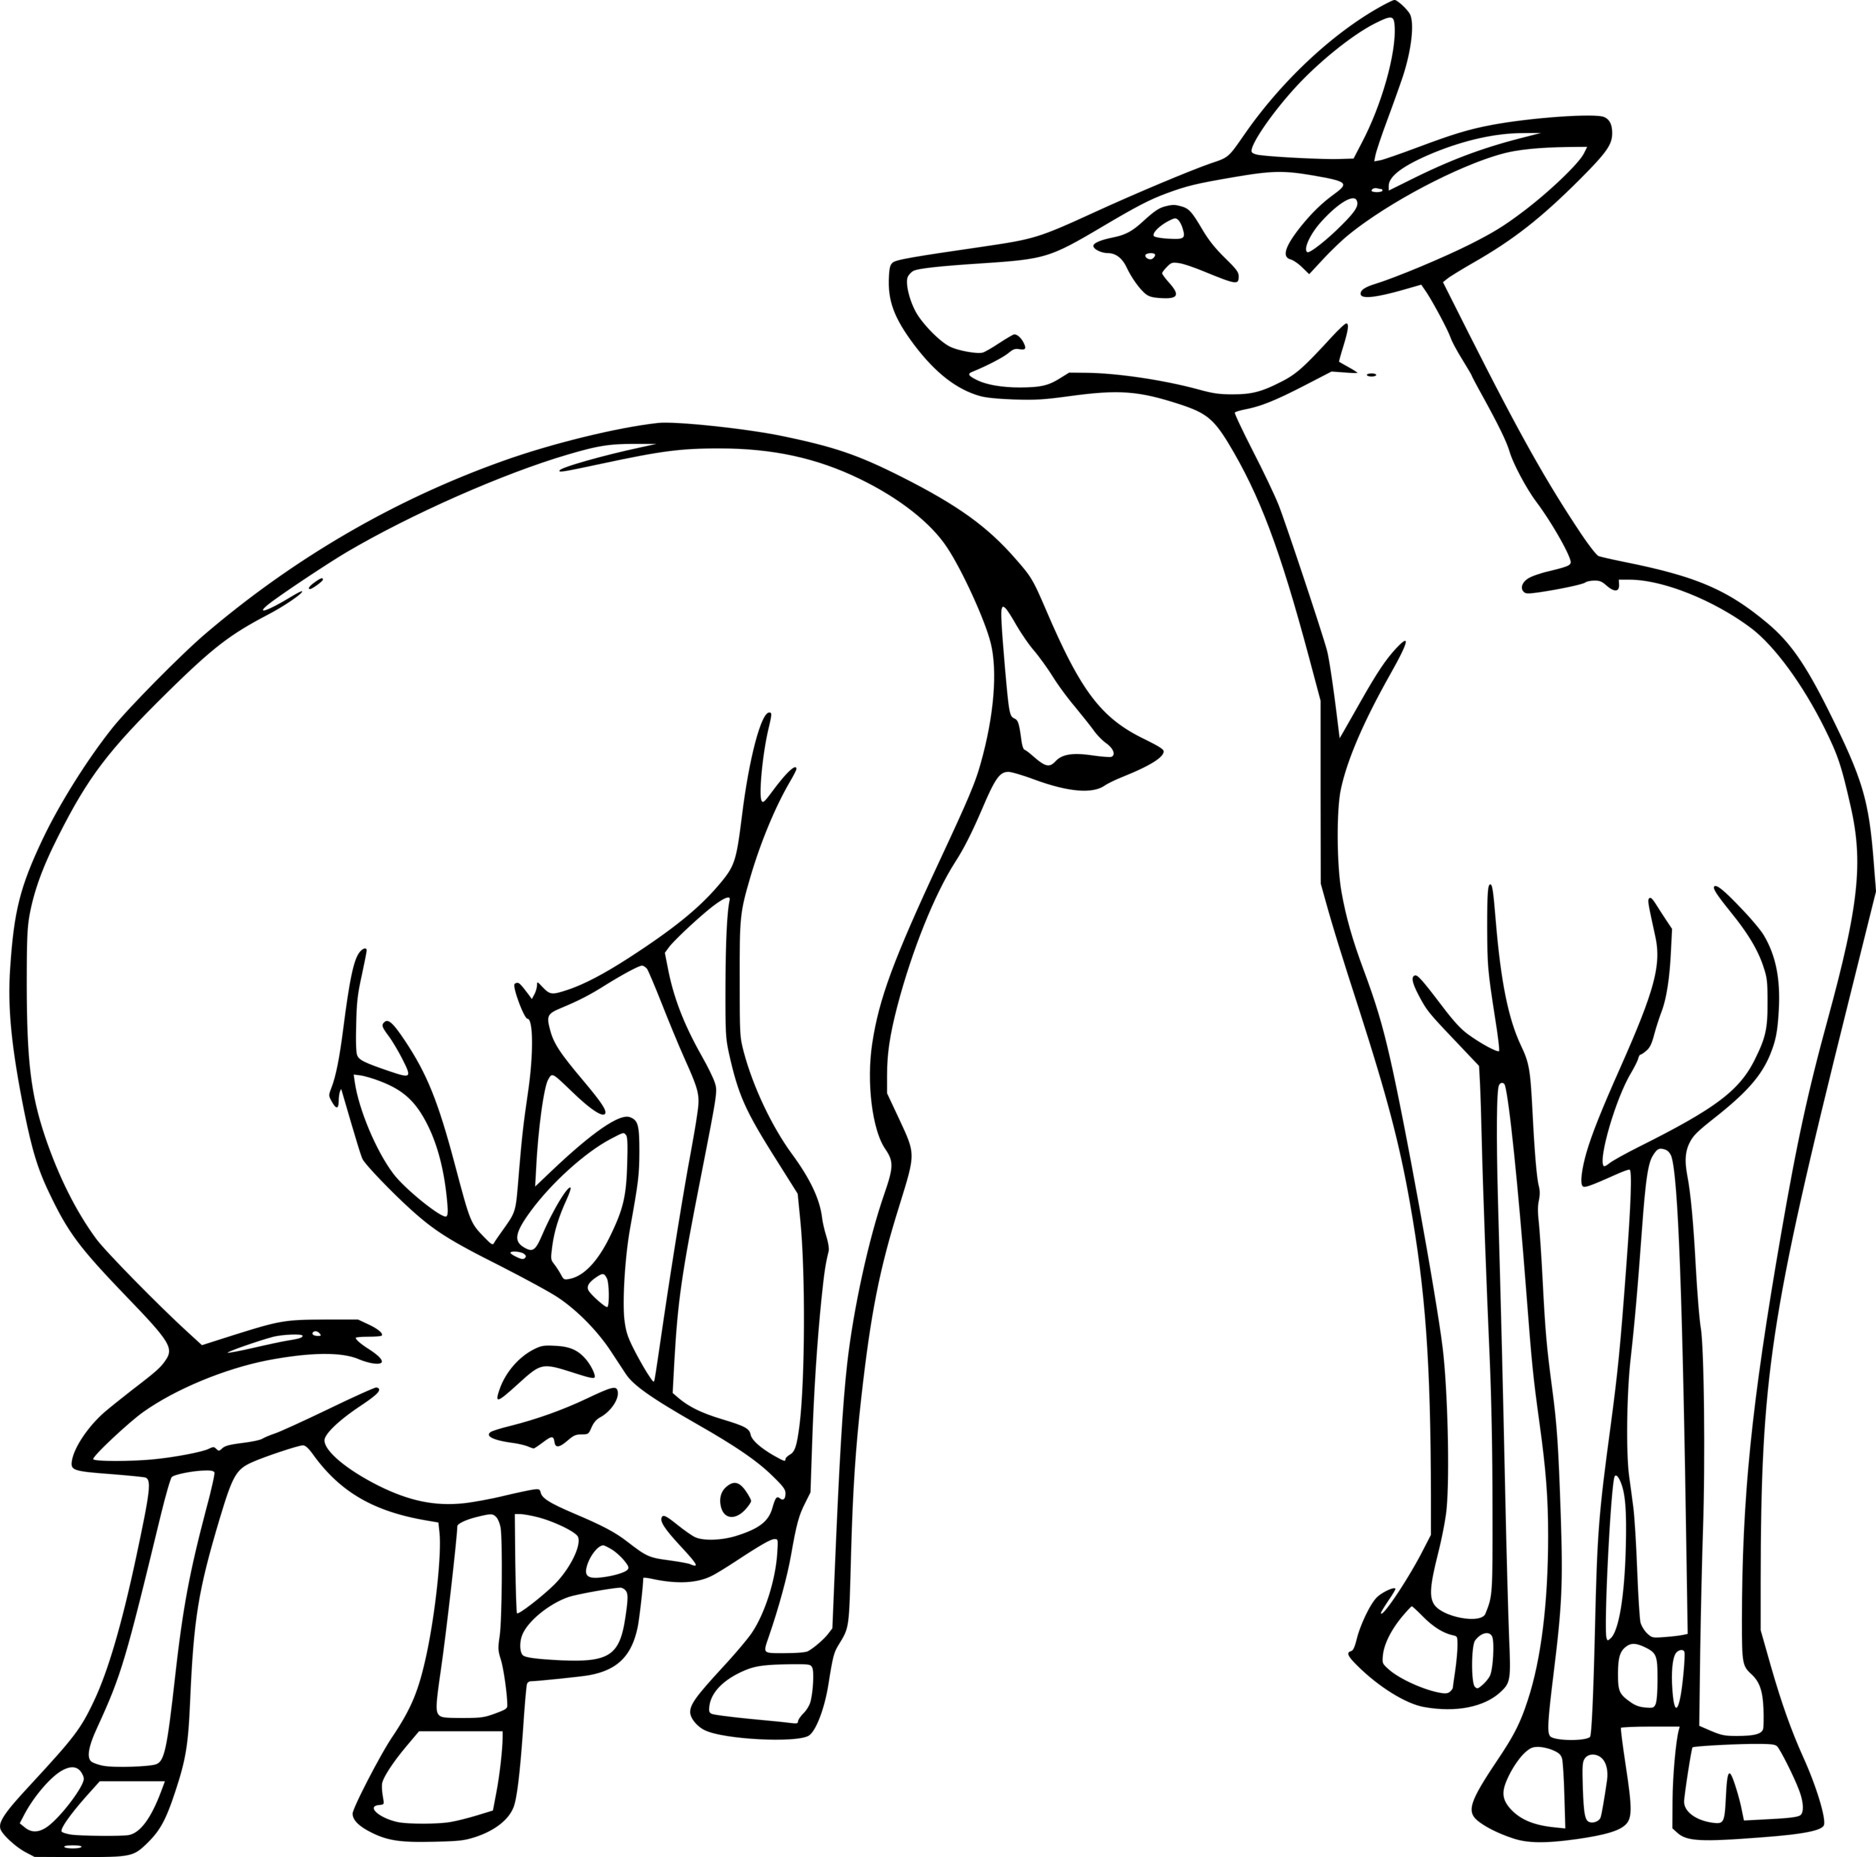 Two Little Deer Coloring Page